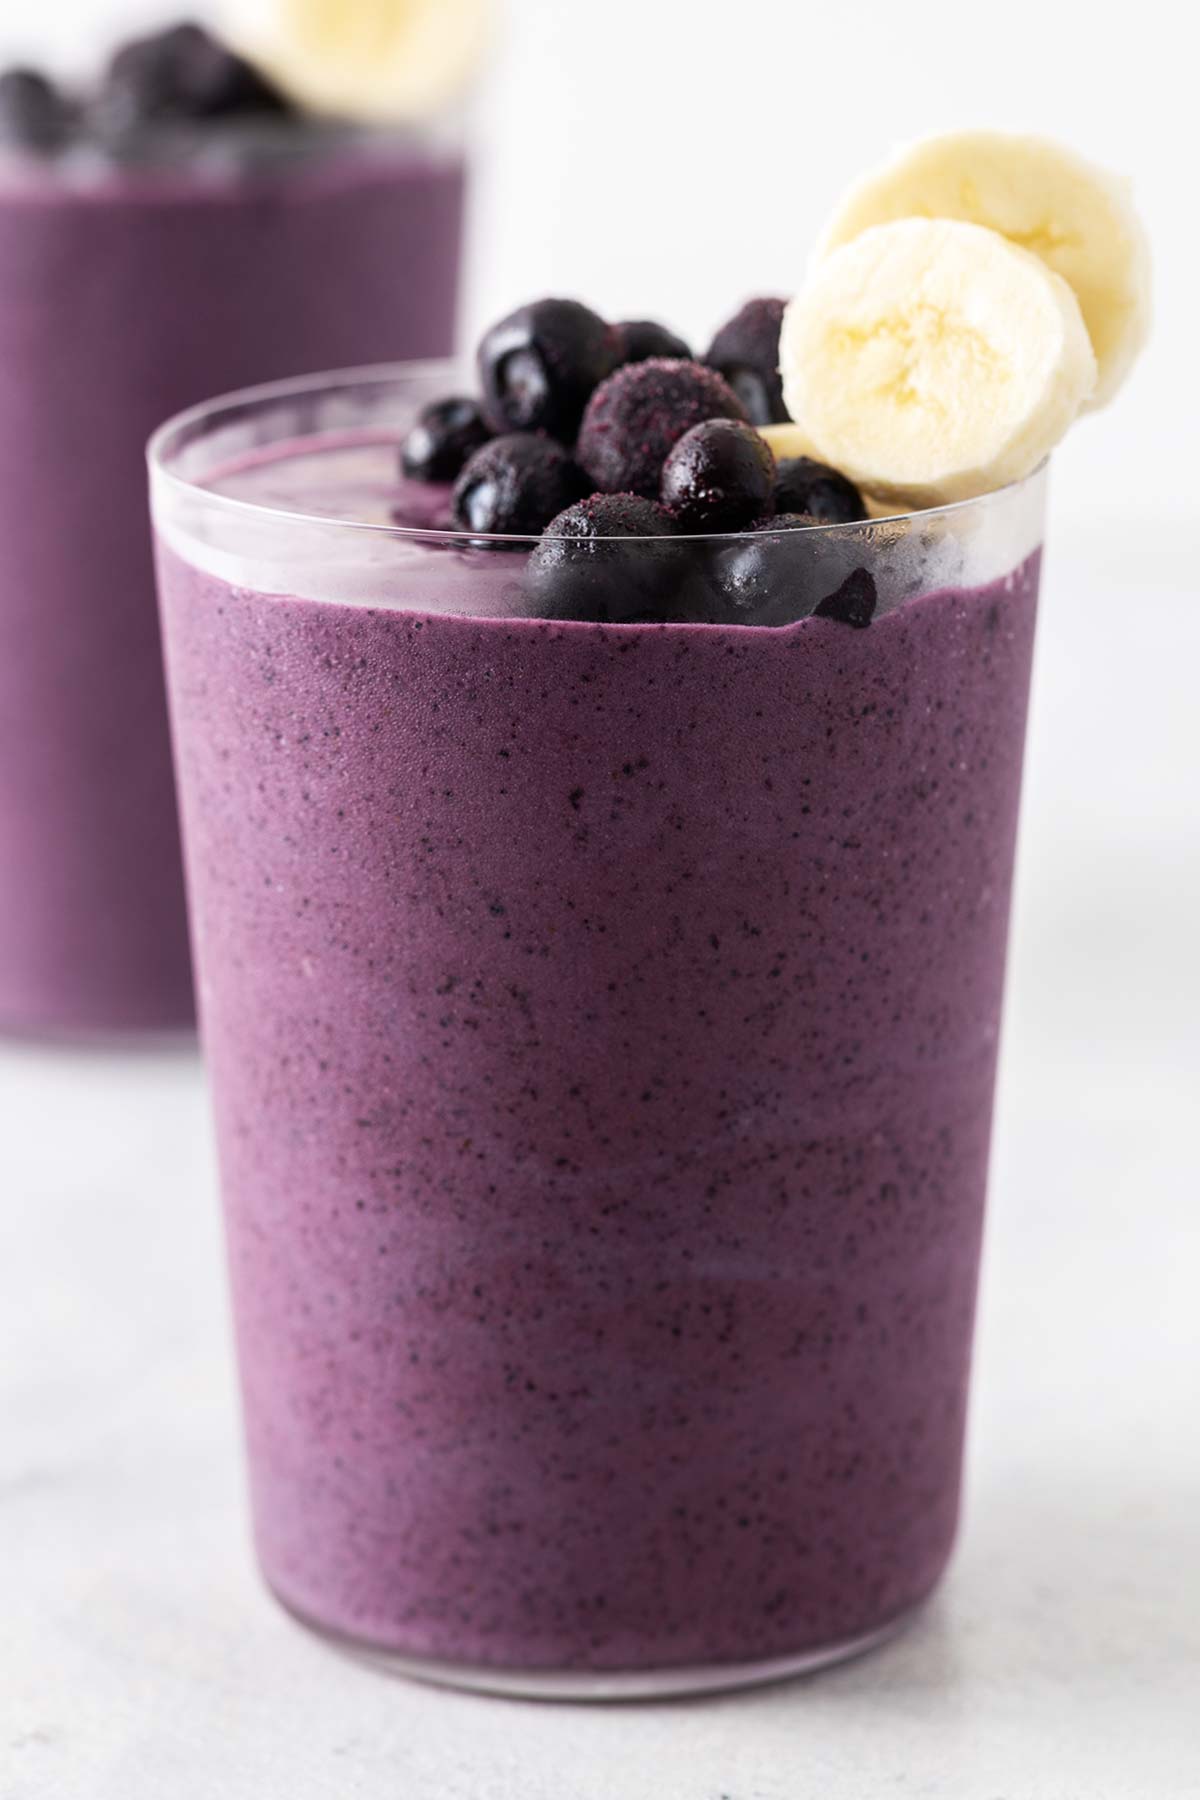 Blueberry smoothie in a glass.